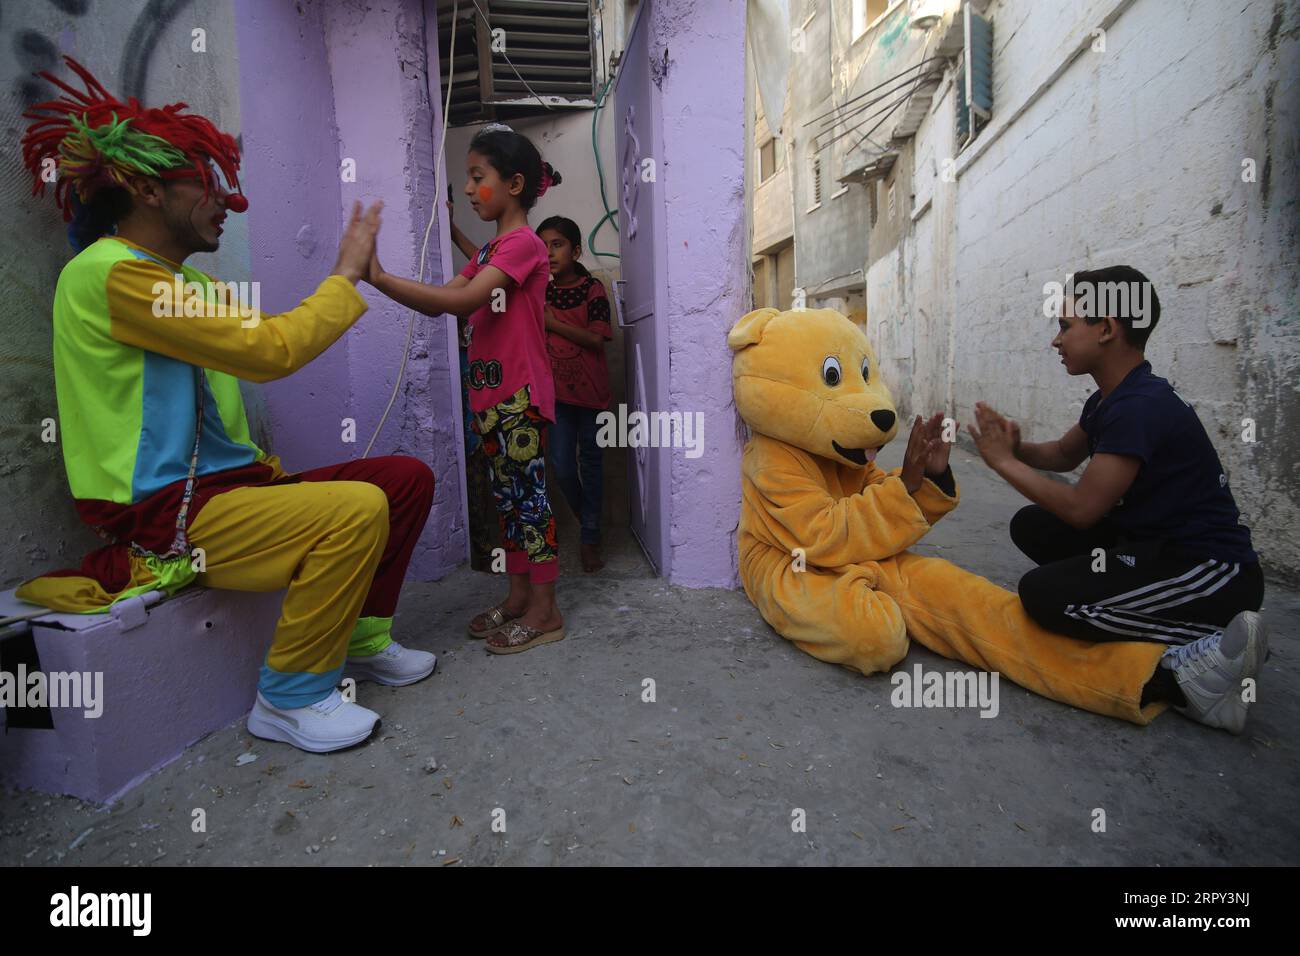 200612 -- GAZA, June 12, 2020 Xinhua -- Palestinian volunteers dressed as a clown and a bear play with refugee children in an effort to lift their spirits in the southern Gaza Strip city of Rafah, on June 12, 2020. Photo by Khaled Omar/Xinhua MIDEAST-GAZA-RAFAH-VOLUNTEERS-REFUGEE CHILDREN PUBLICATIONxNOTxINxCHN Stock Photo